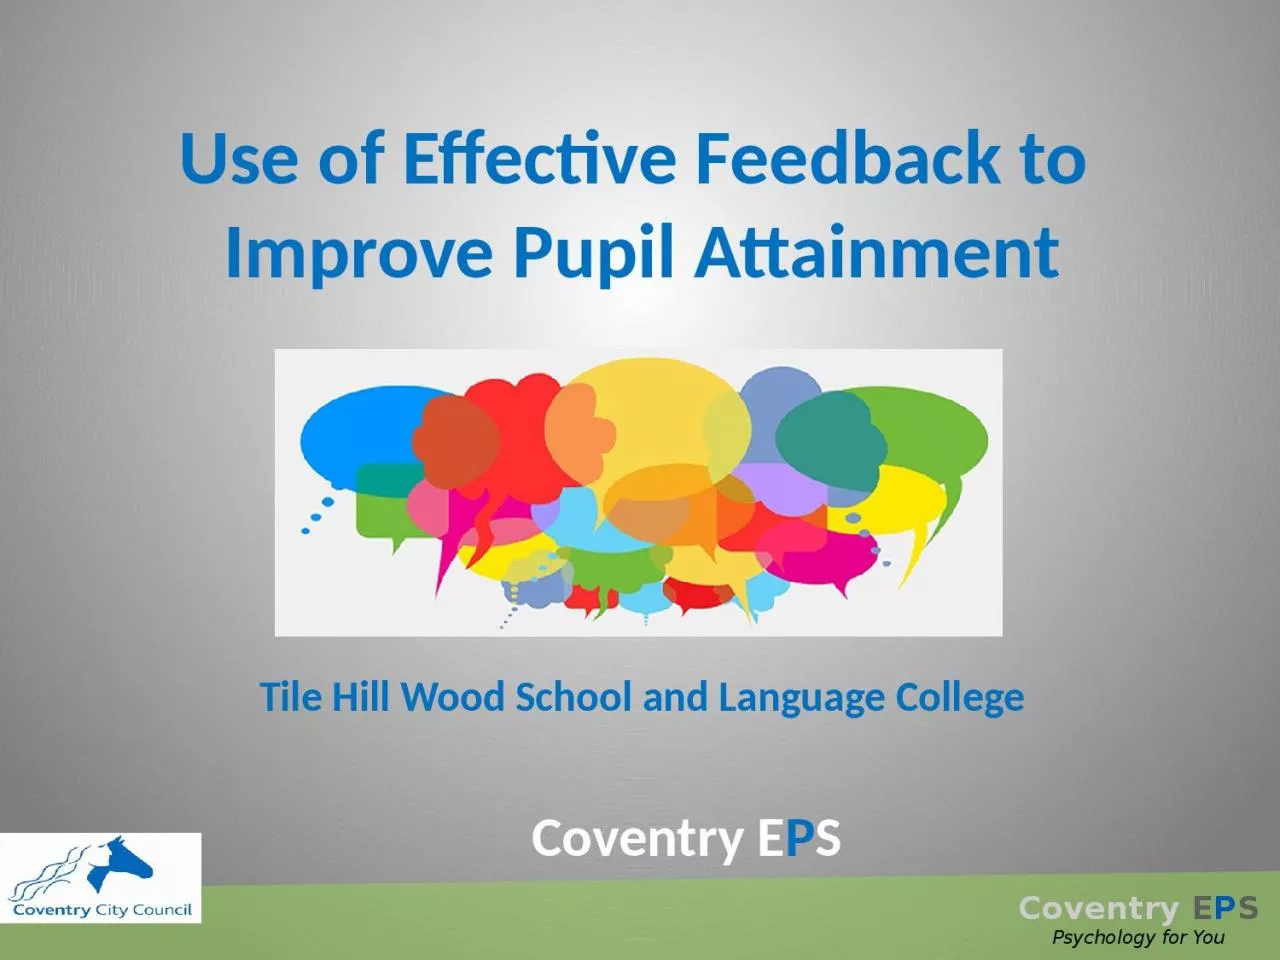 Coventry E P S Use of Effective Feedback to